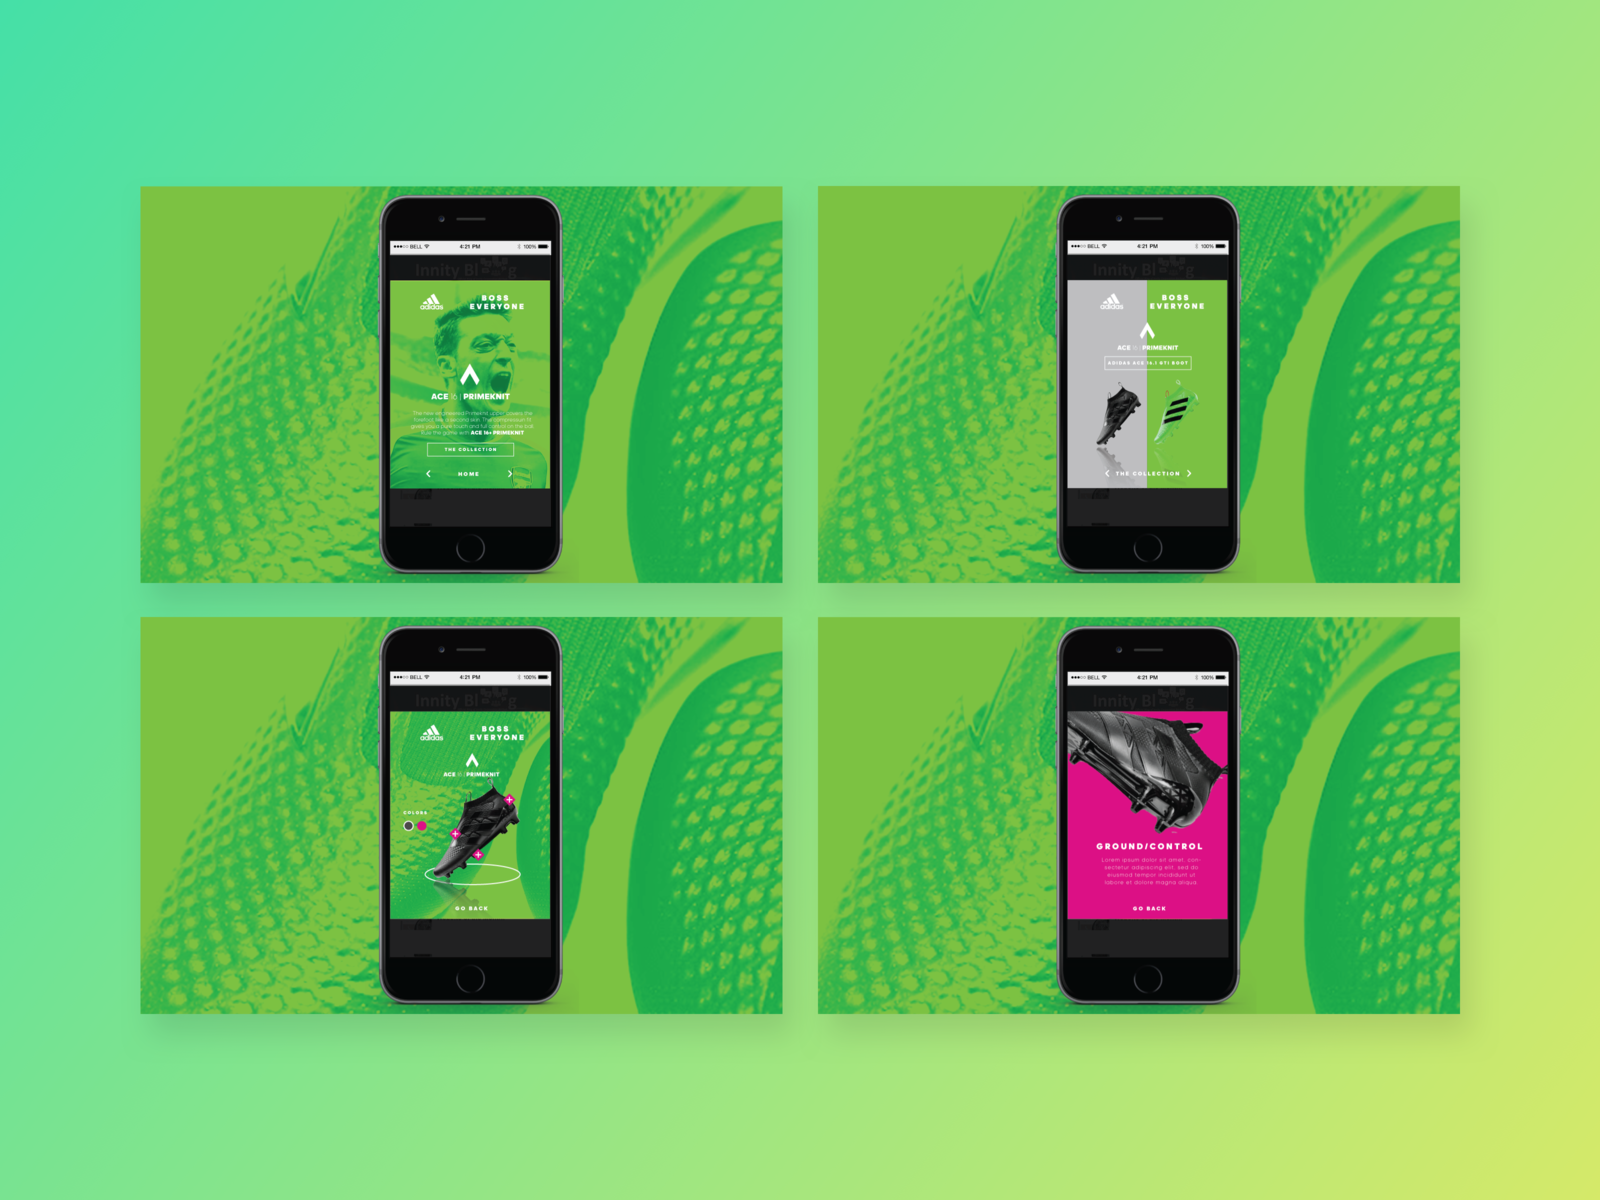 Adidas Boss Everyone Campaign Mobile Engage By Rizza Valdez On Dribbble